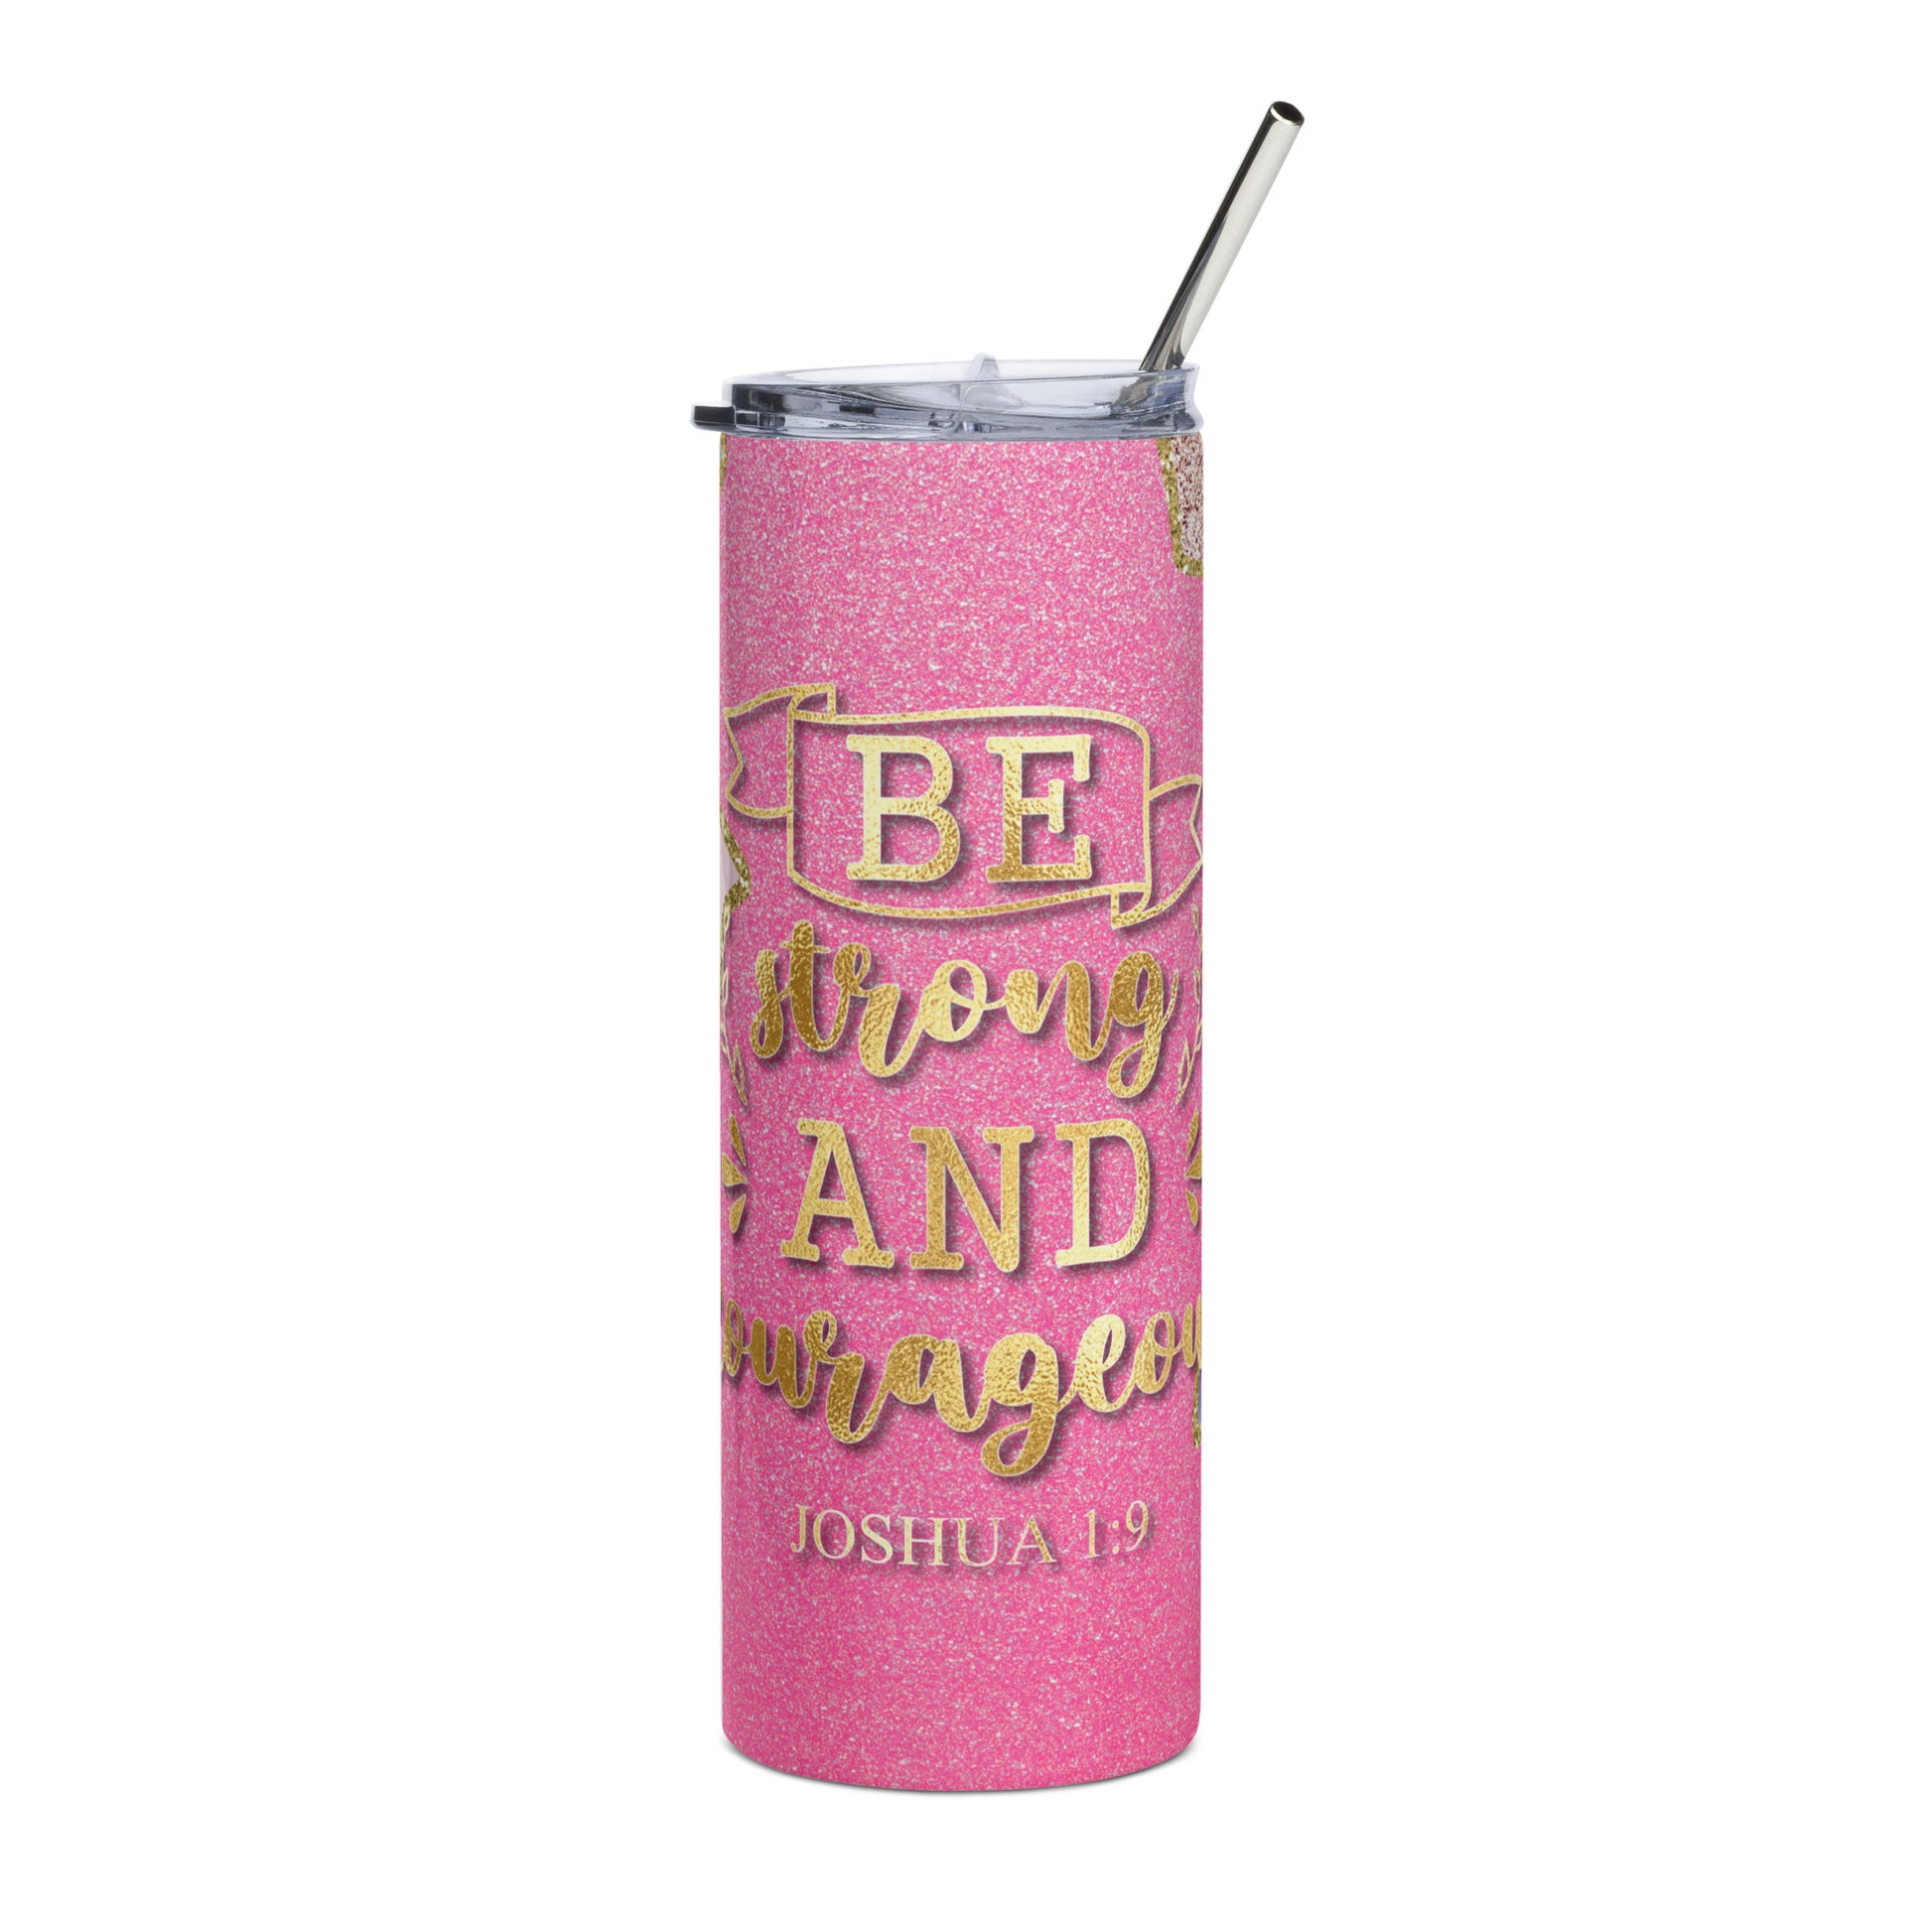  "Be Strong and Courageous Tumbler" - A 20 oz empowering stainless steel tumbler featuring an inspirational phrase and design.